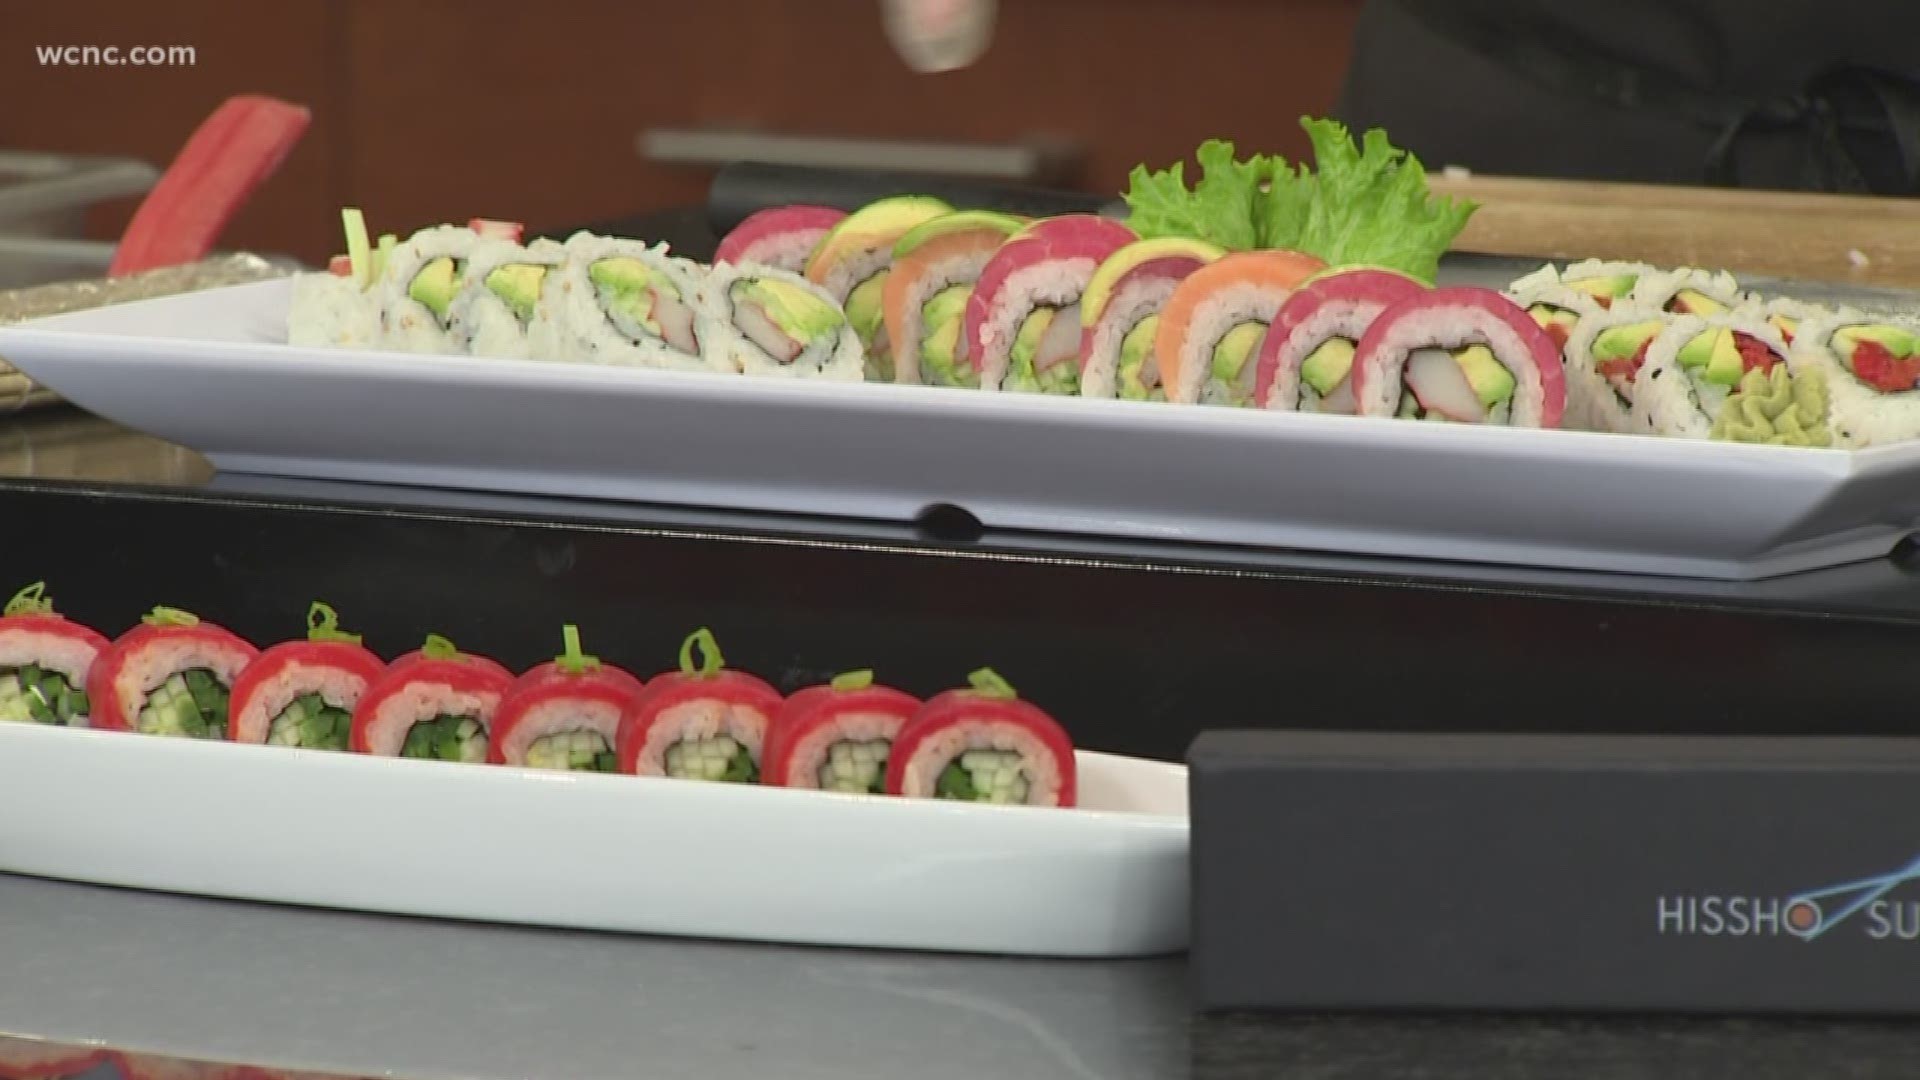 Chef Dan Yang from Hissho Sushi shows us how to make a few rolls